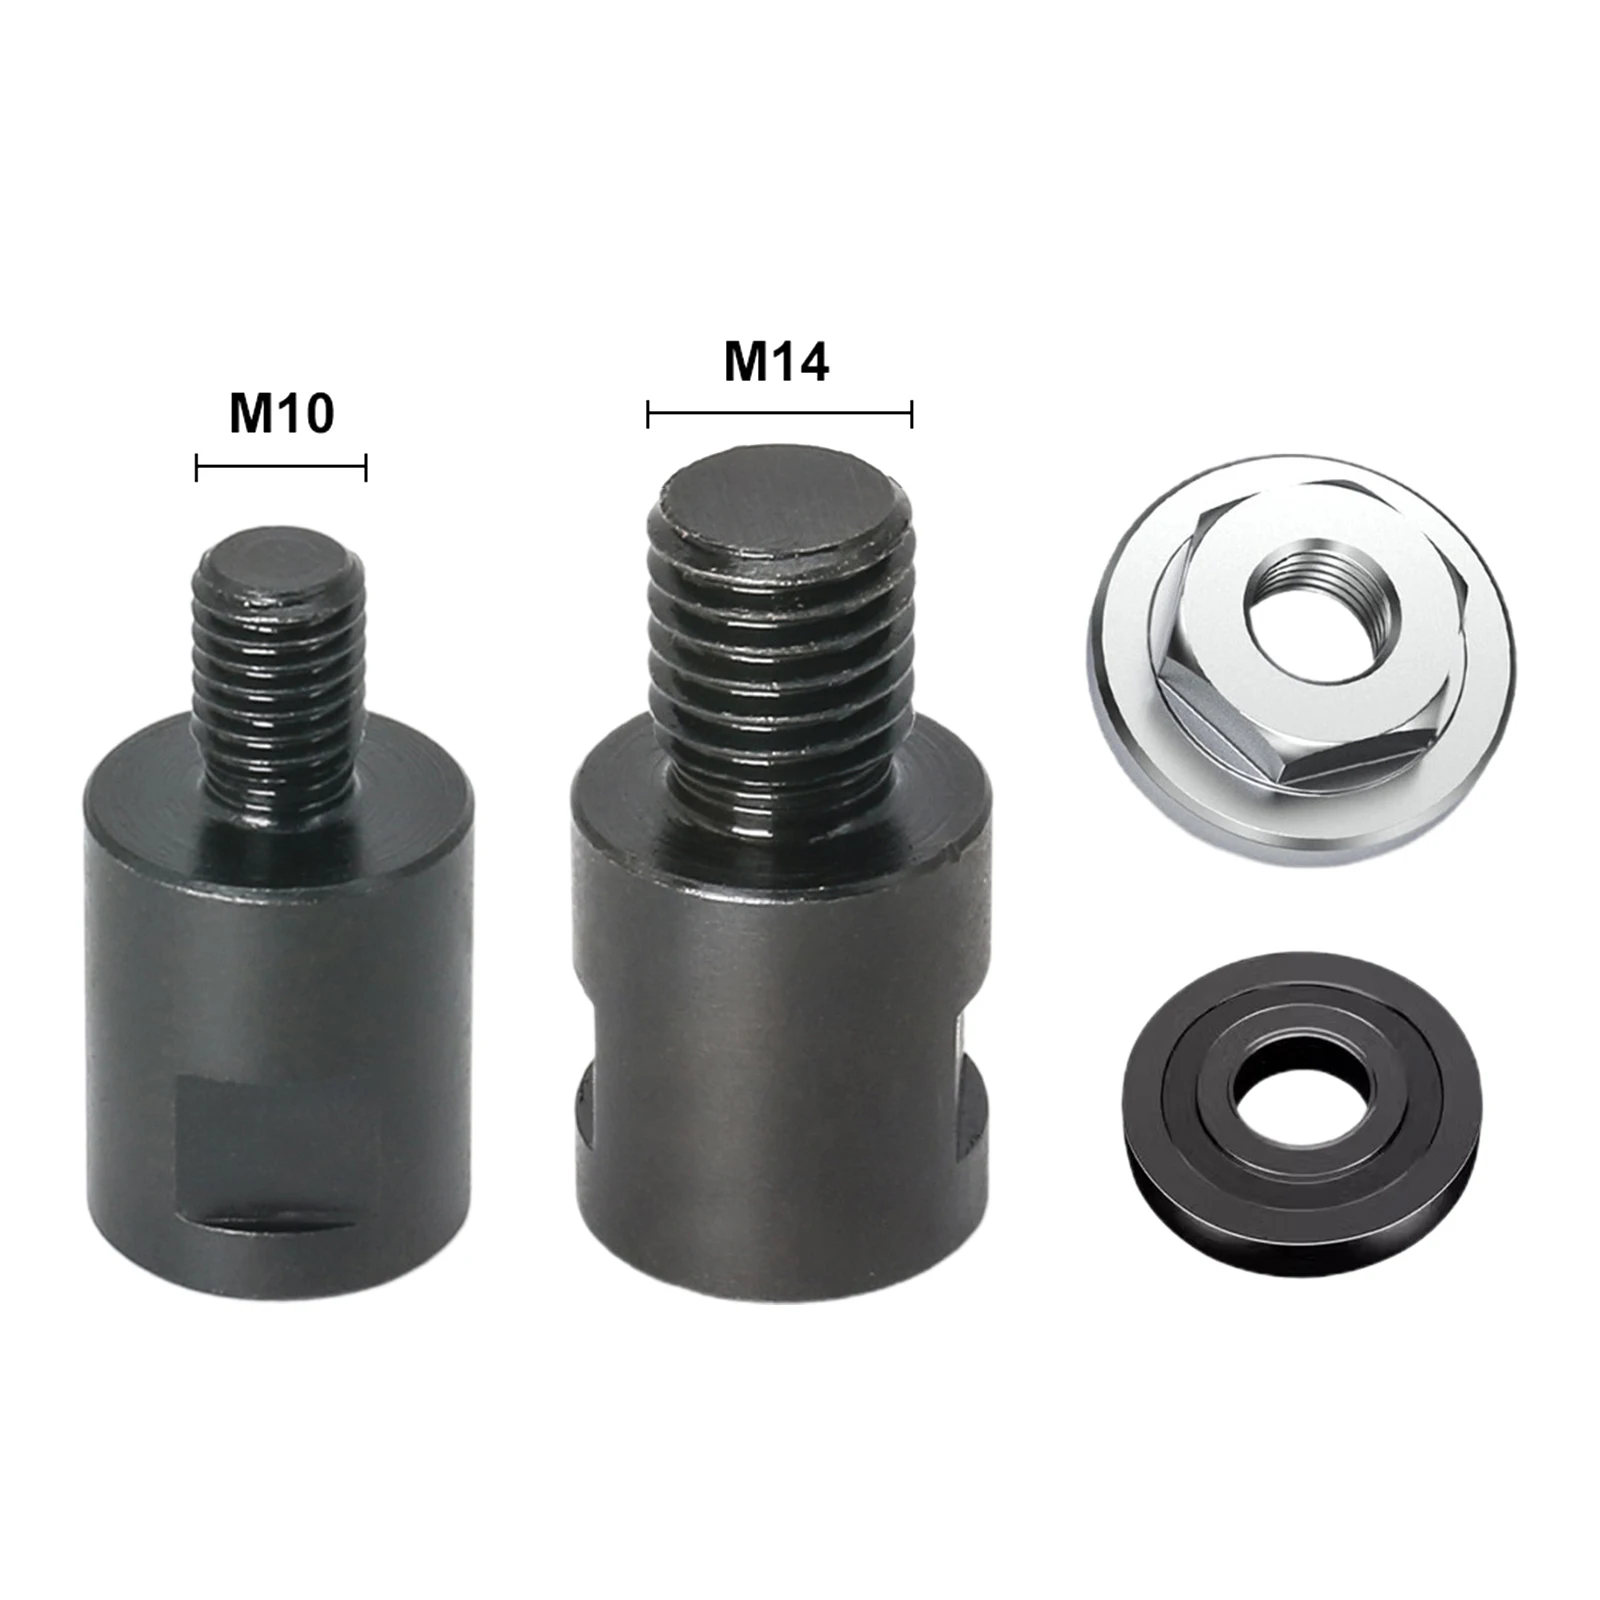 M14 M1 Grinder Adapter Converter And Platen Set Angle Grinder  Accessories Connector Screw Nuts Slotting Different Thread